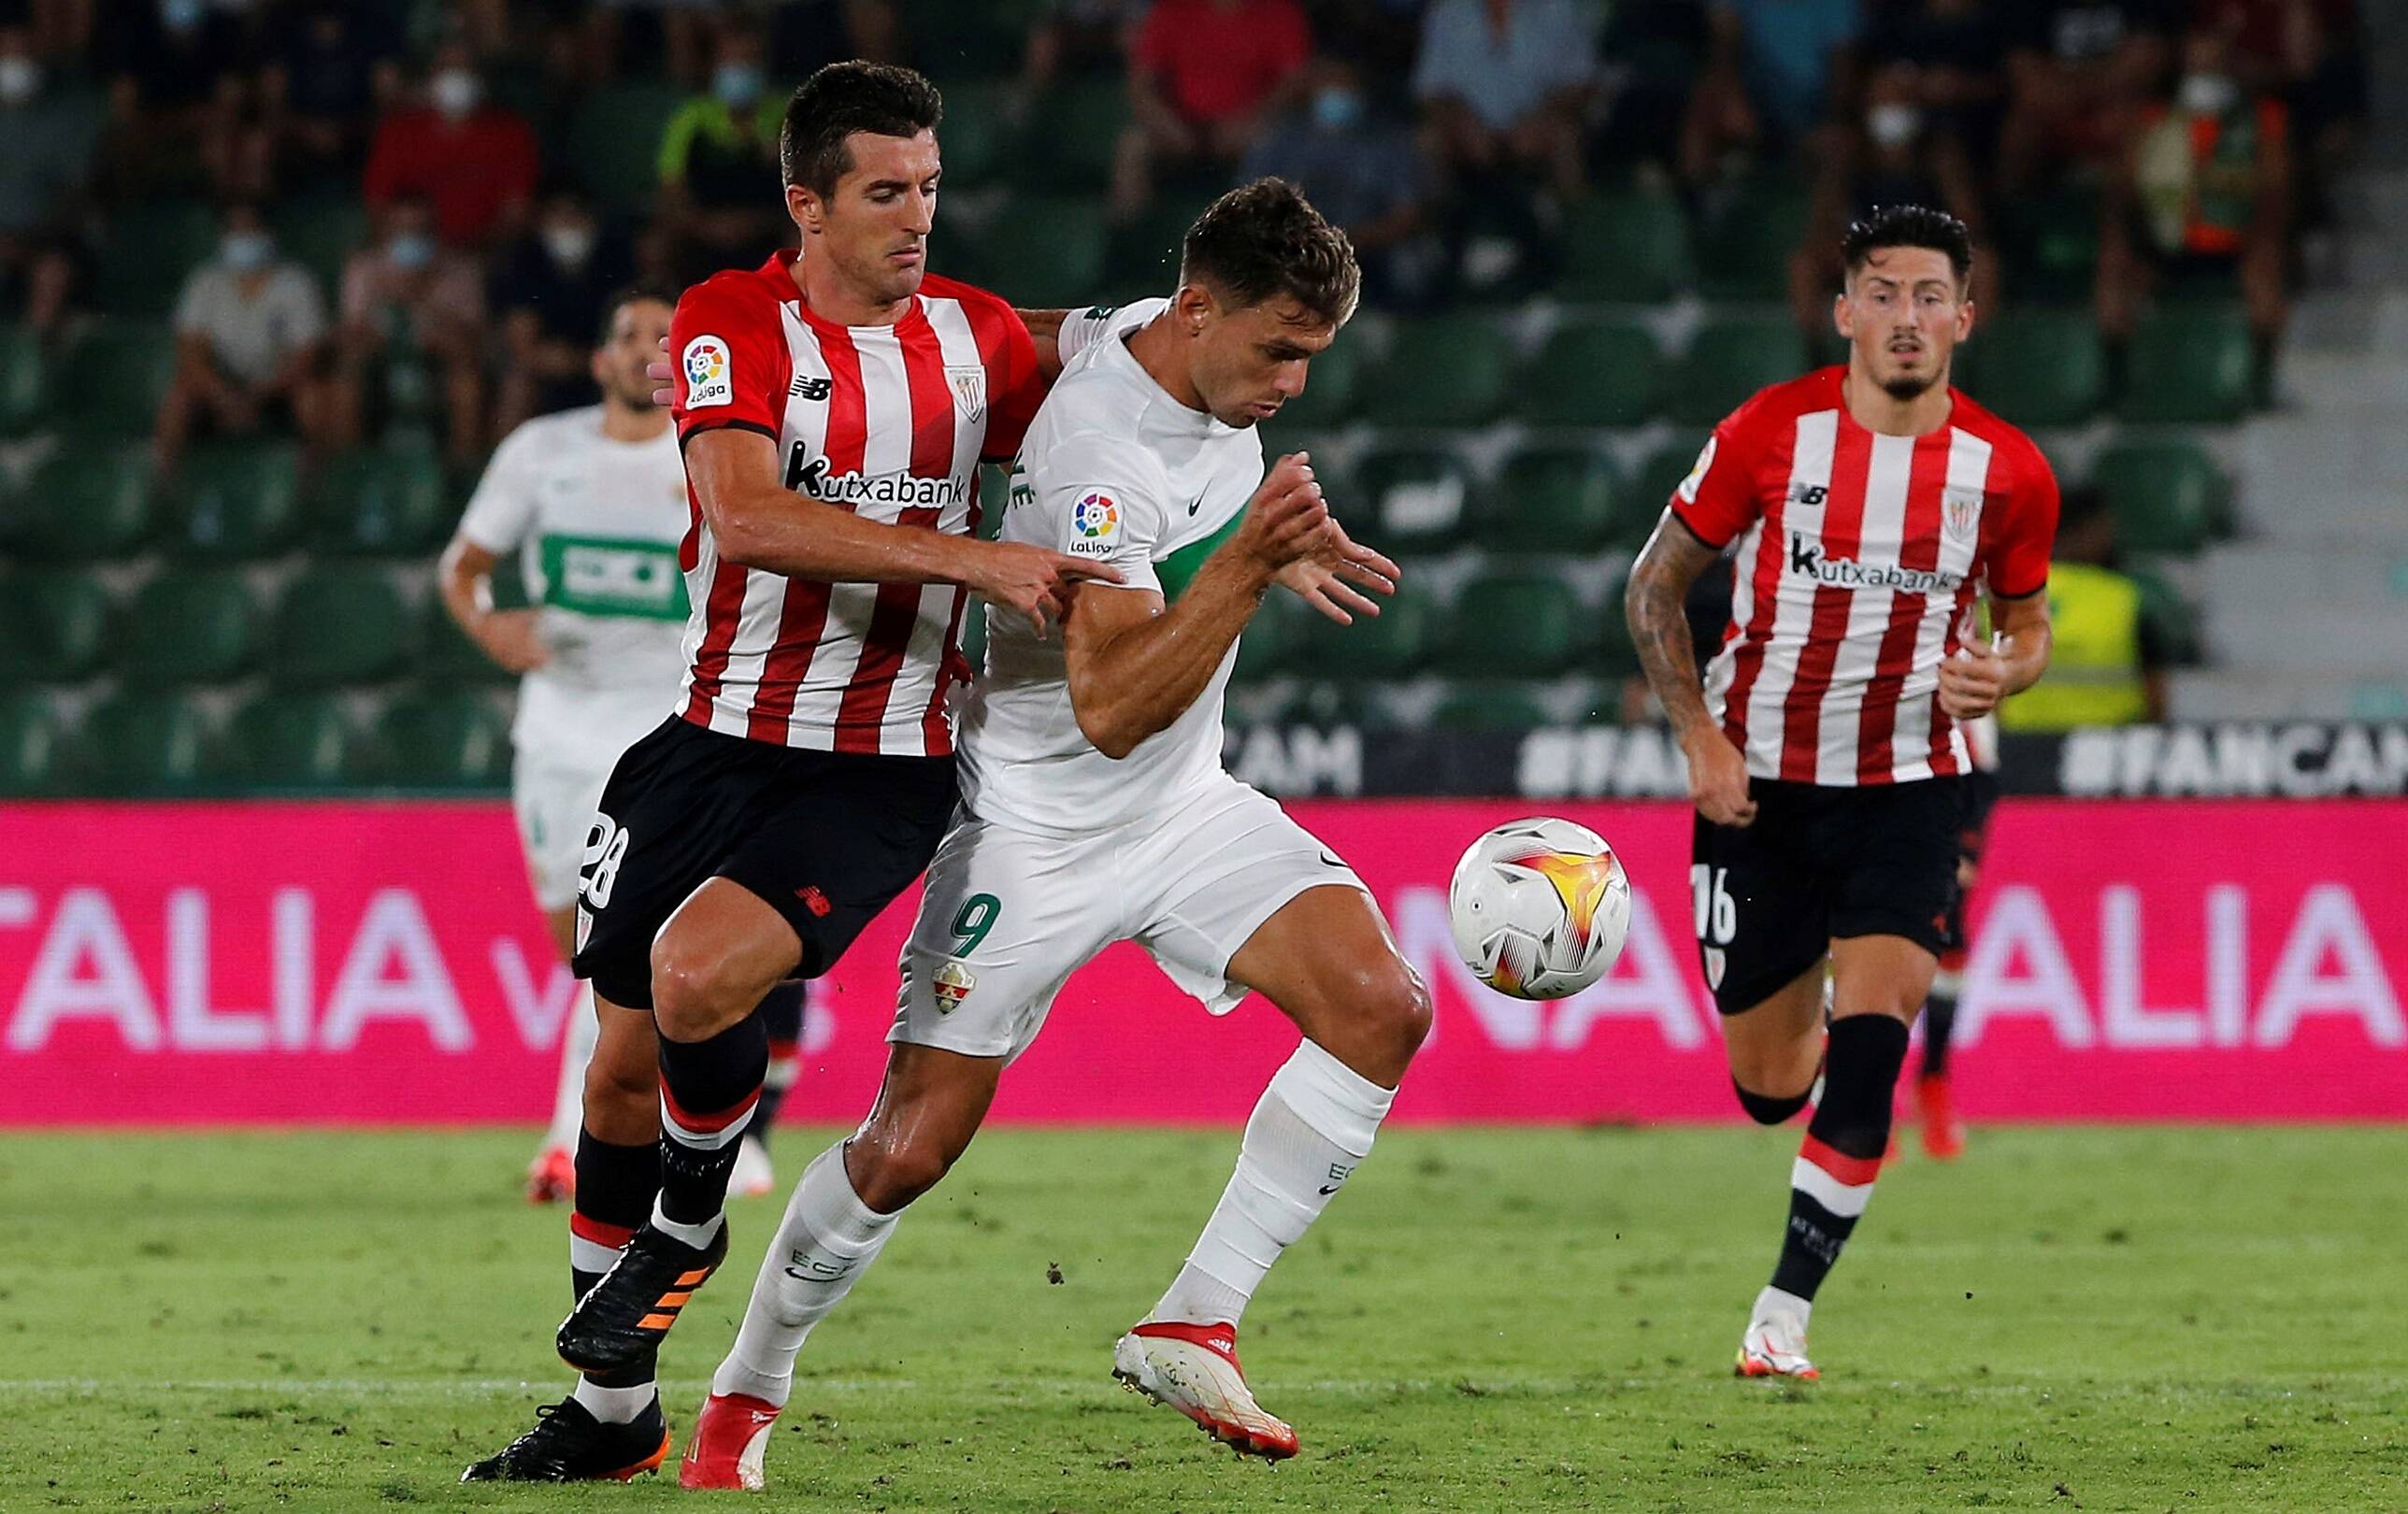 Athletic Bilbao draw 0-0 away at Elche in 2021/22 opening game - Football Espana